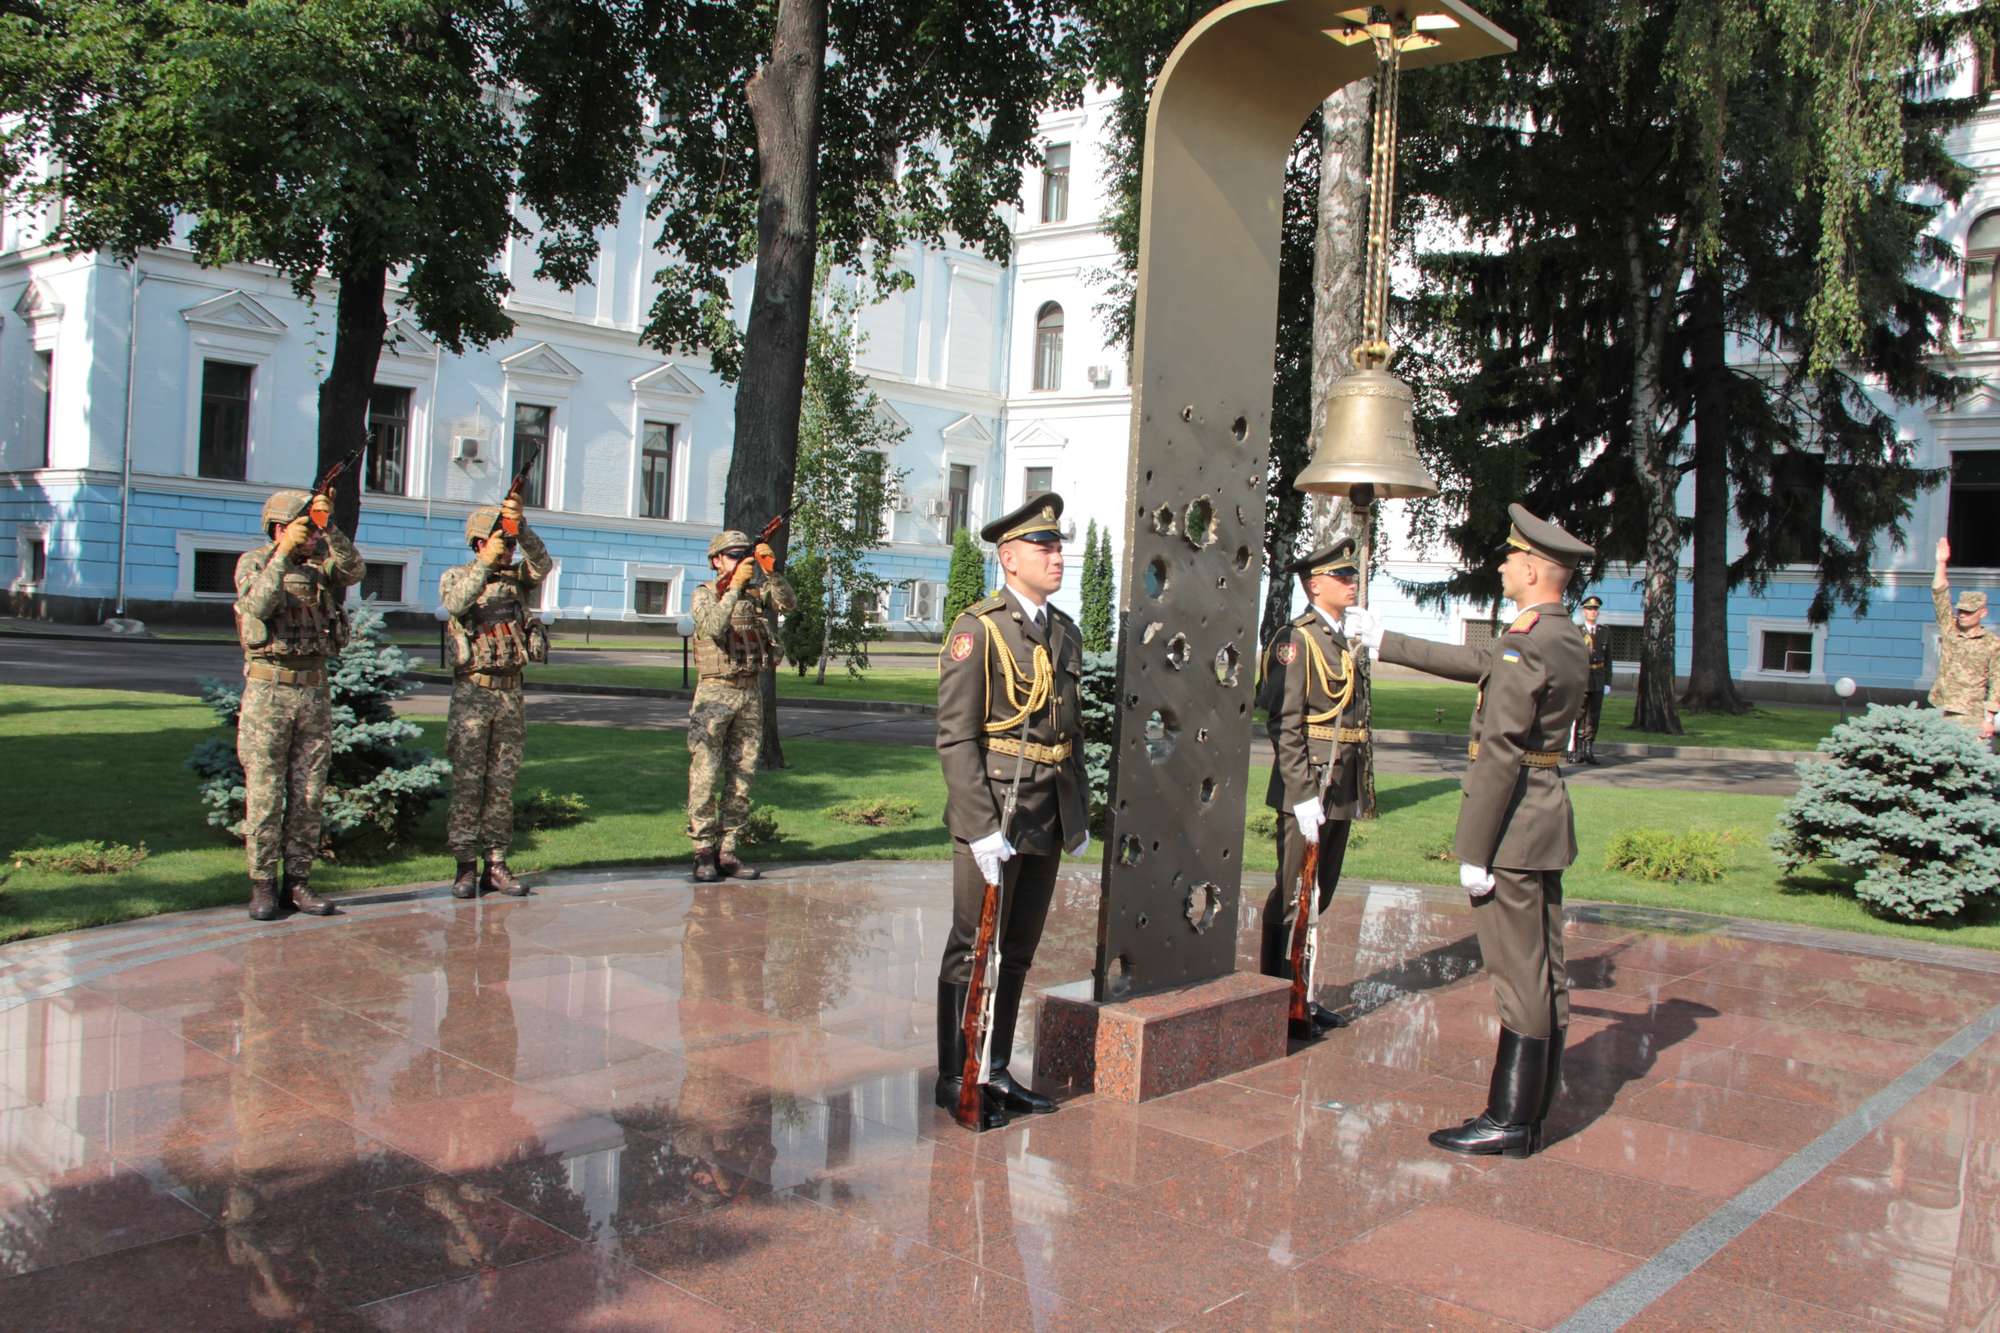 Today, Perished Ukrainian Heroes are Commemorated at the Ministry of Defence of Ukraine